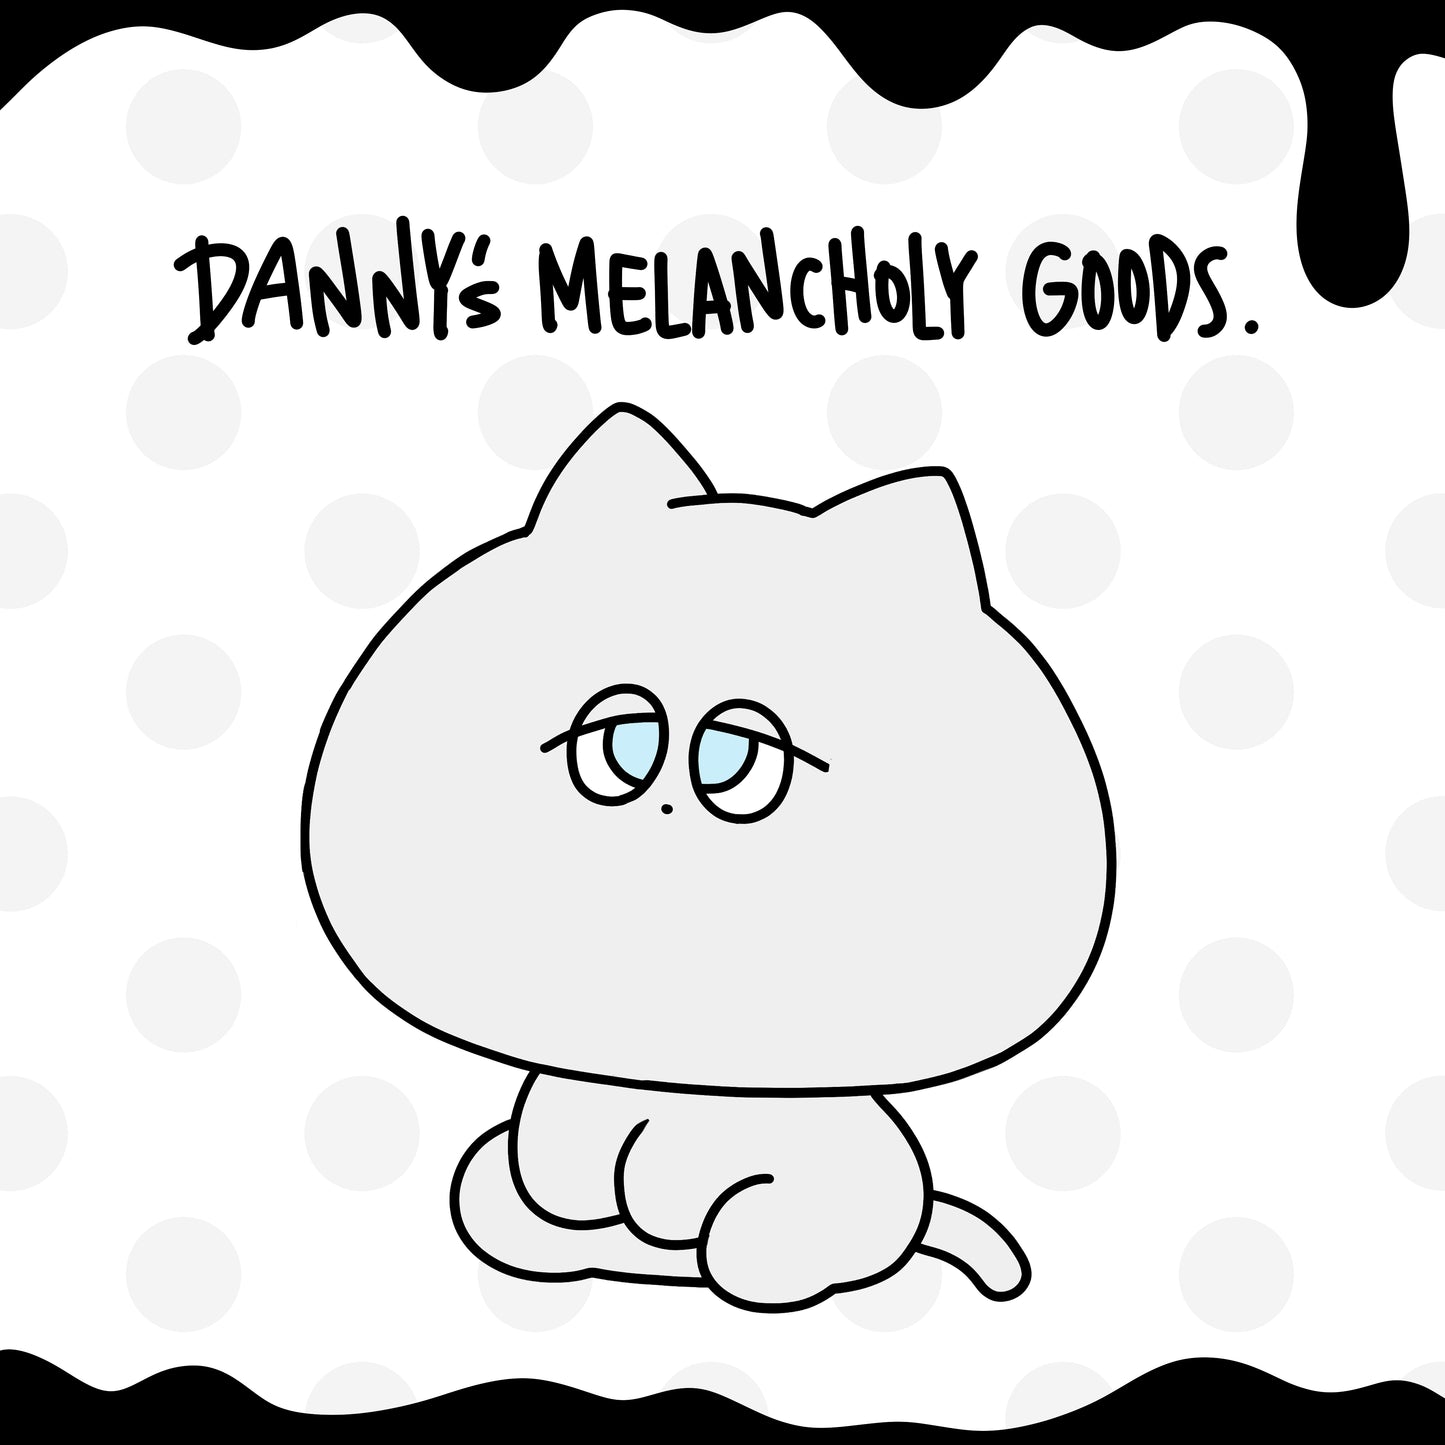 [Asamimi-chan] Danny-kun random sticker (5 types in total) [Made-to-order]